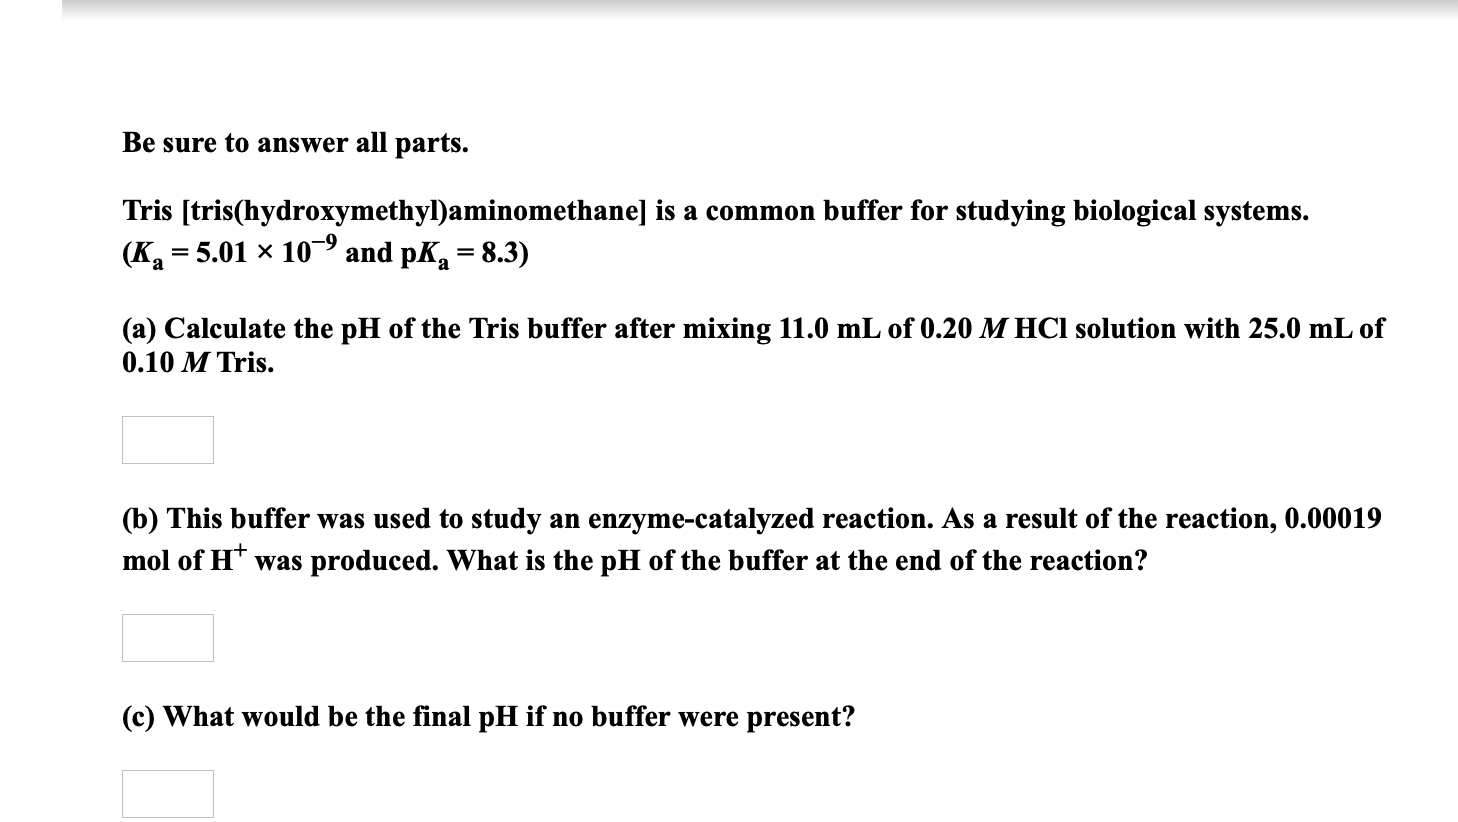 Be sure to answer all parts.
Tris [tris(hydroxymethyl)aminomethane] is a common buffer for studying biological systems.
(K = 5.01 × 10 and pK = 8.3)
(a) Calculate the pH of the Tris buffer after mixing 11.0 mL of 0.20 M HCl solution with 25.0 mL of
0.10 M Tris.
(b) This buffer was used to study an enzyme-catalyzed reaction. As a result of the reaction, 0.00019
mol of H* was produced. What is the pH of the buffer at the end of the reaction?
(c) What would be the final pH if no buffer were present?
